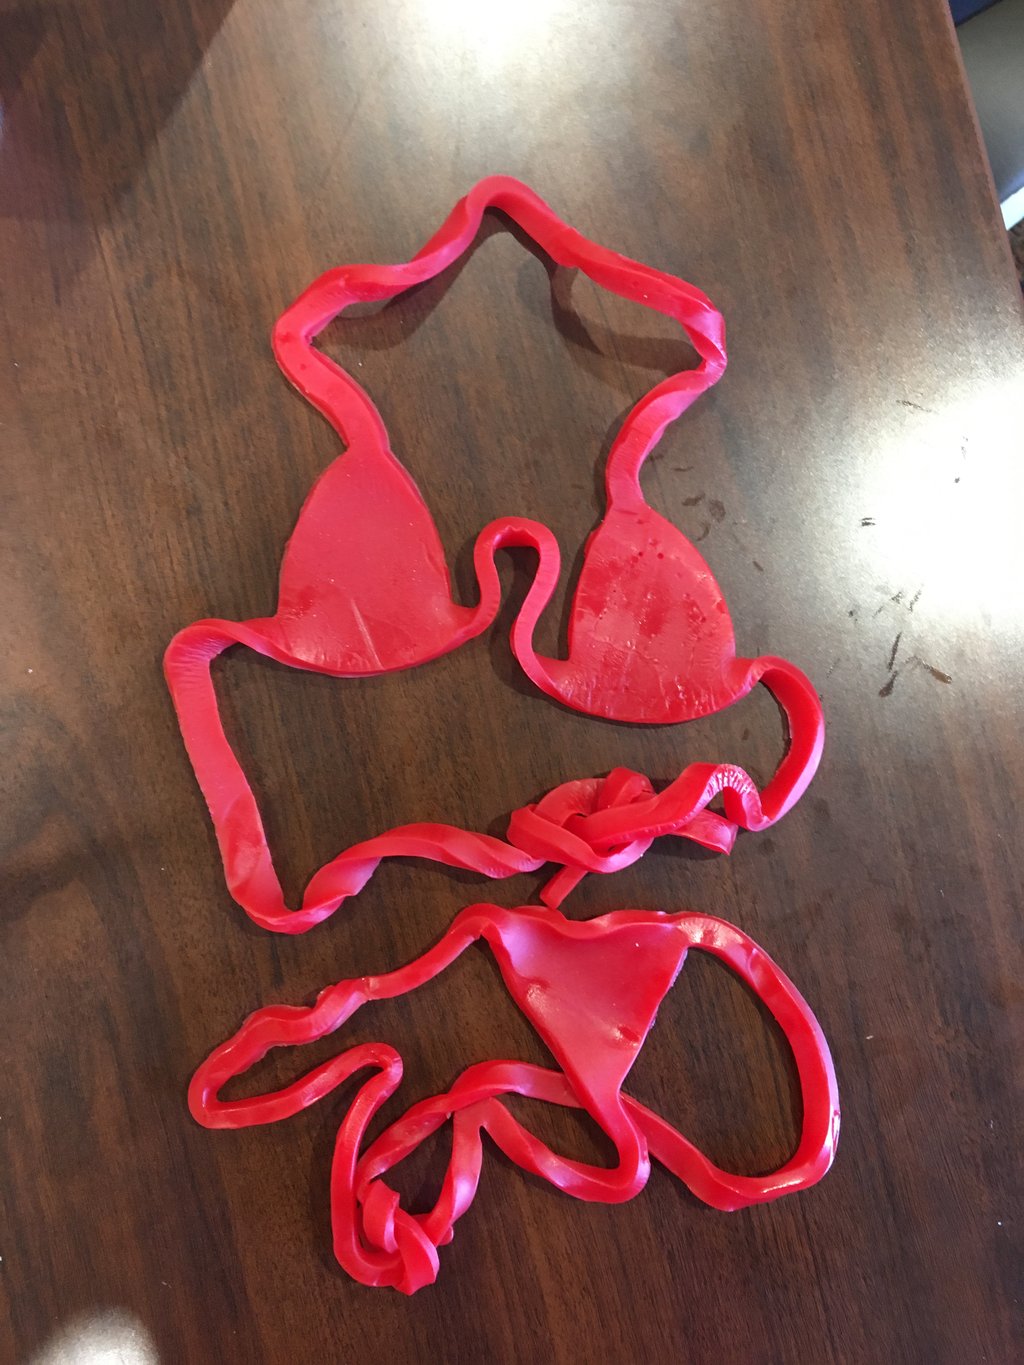 Top Rated - Edible Thong Underwear - Chocolate Strawberry in Dubai